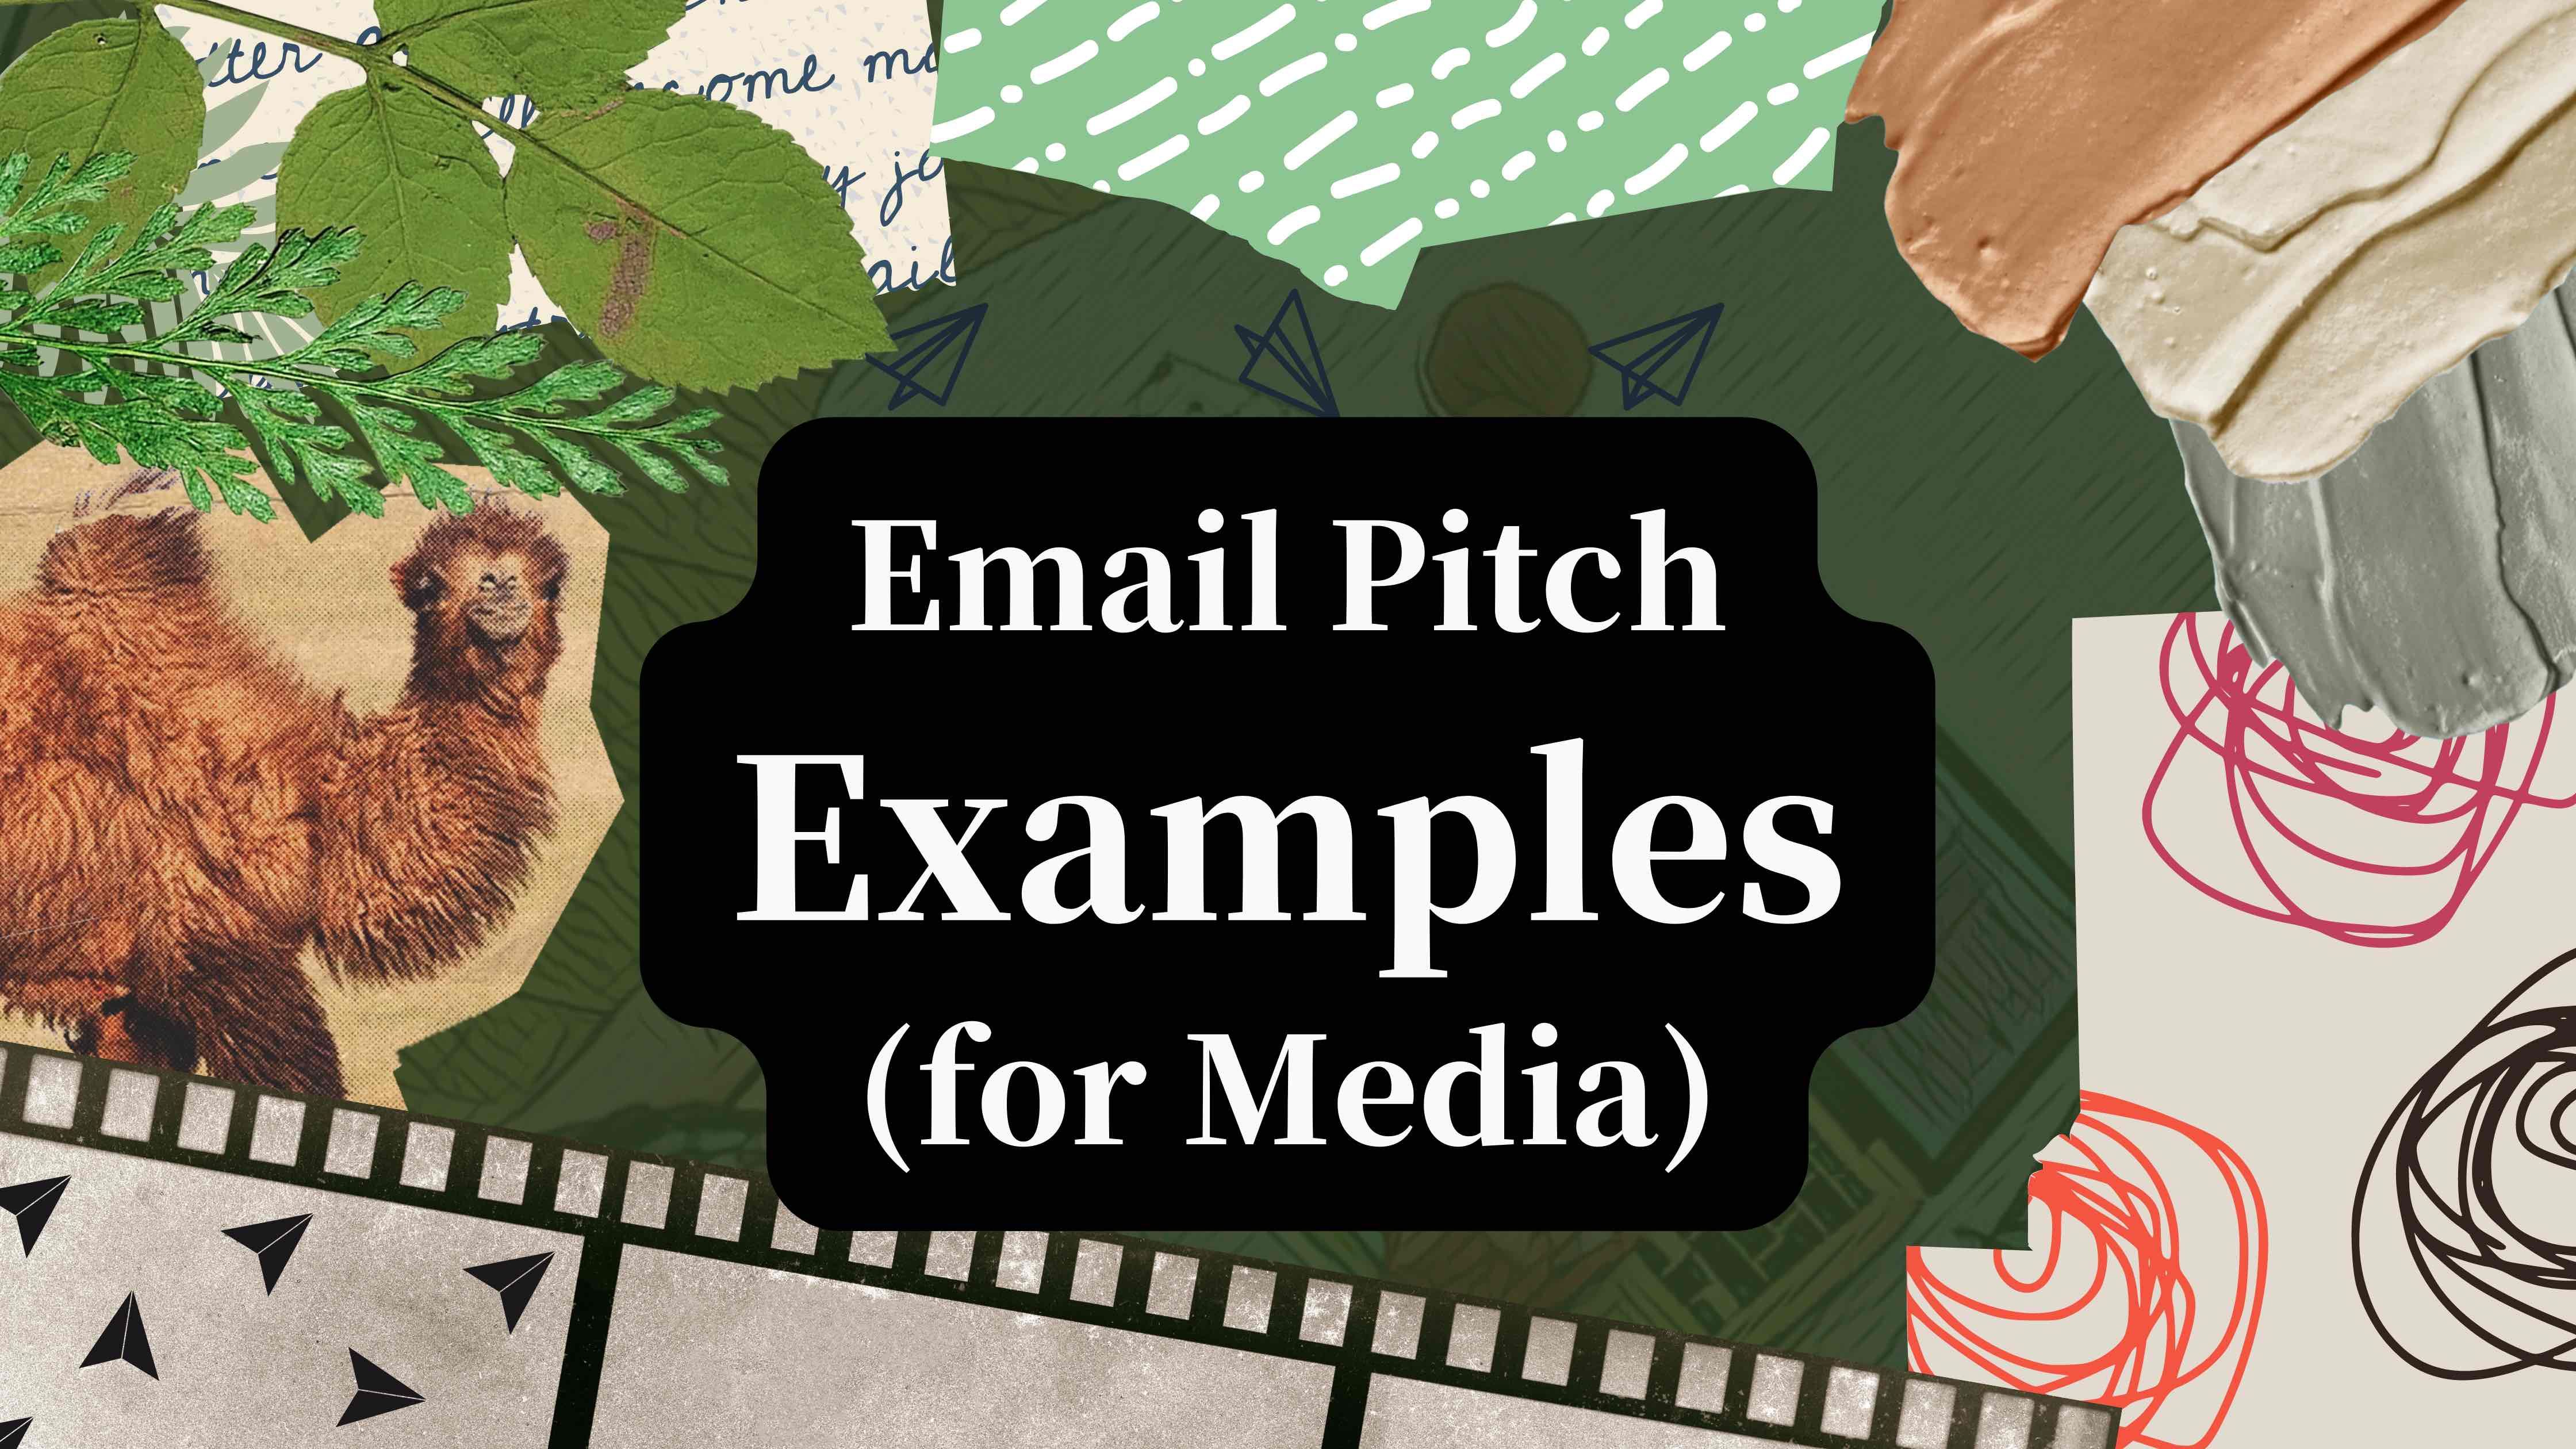 Email Pitch Examples: 4 Media Pitches That Worked